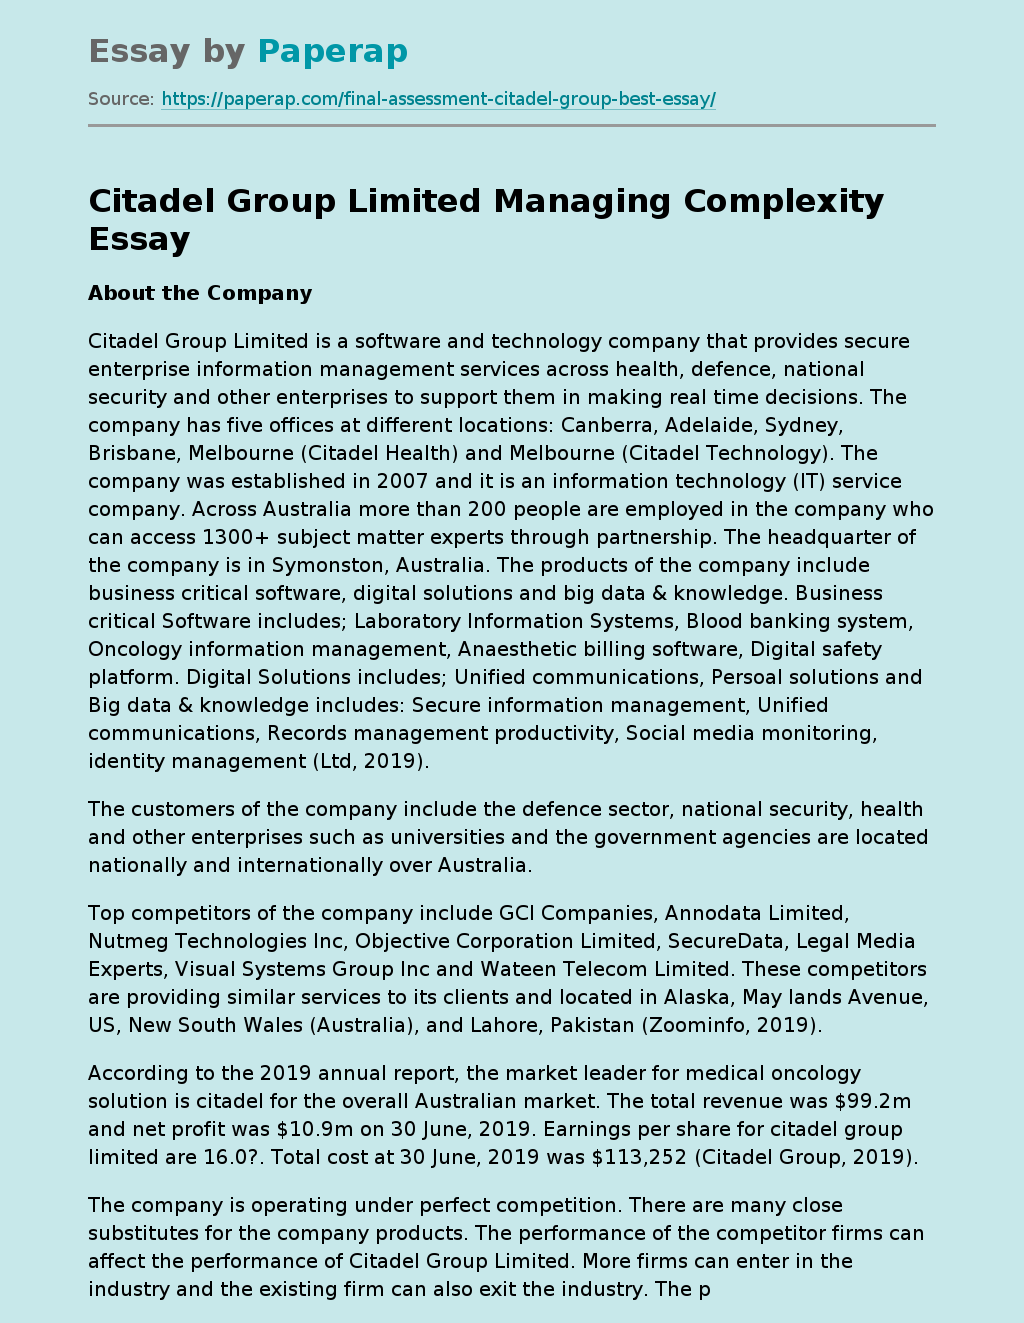 Citadel Group Limited Managing Complexity